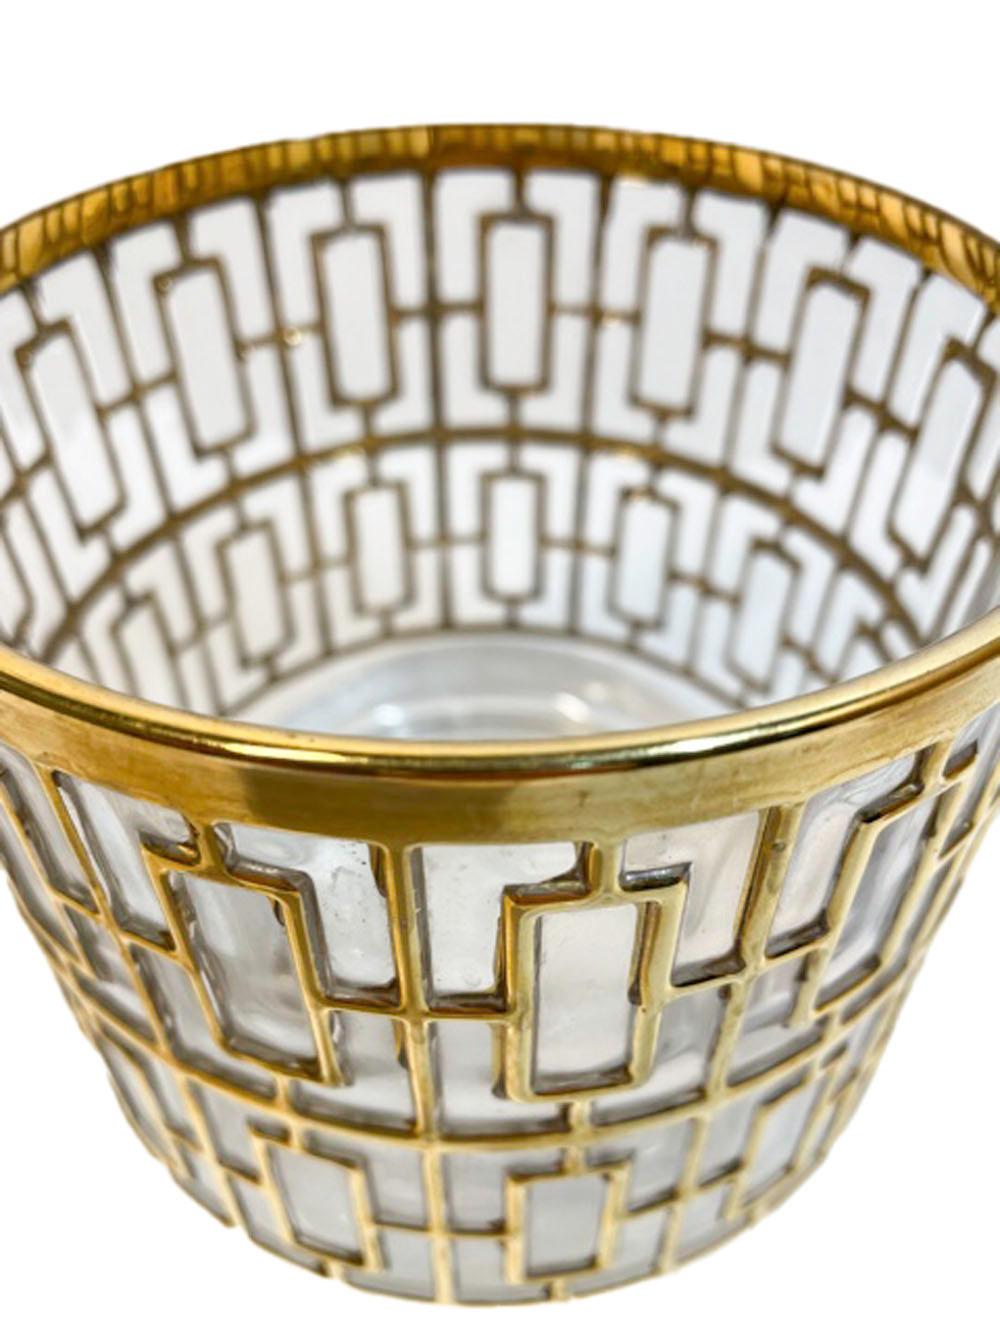 Mid-Century Modern ice bowl and 6 rocks glasses made by Imperial Glass Co. in the Shoji Pattern. Each piece is molded with a raised pattern inspired by Japanese Shoji screens, the raised areas are then gilded in 22k gold.